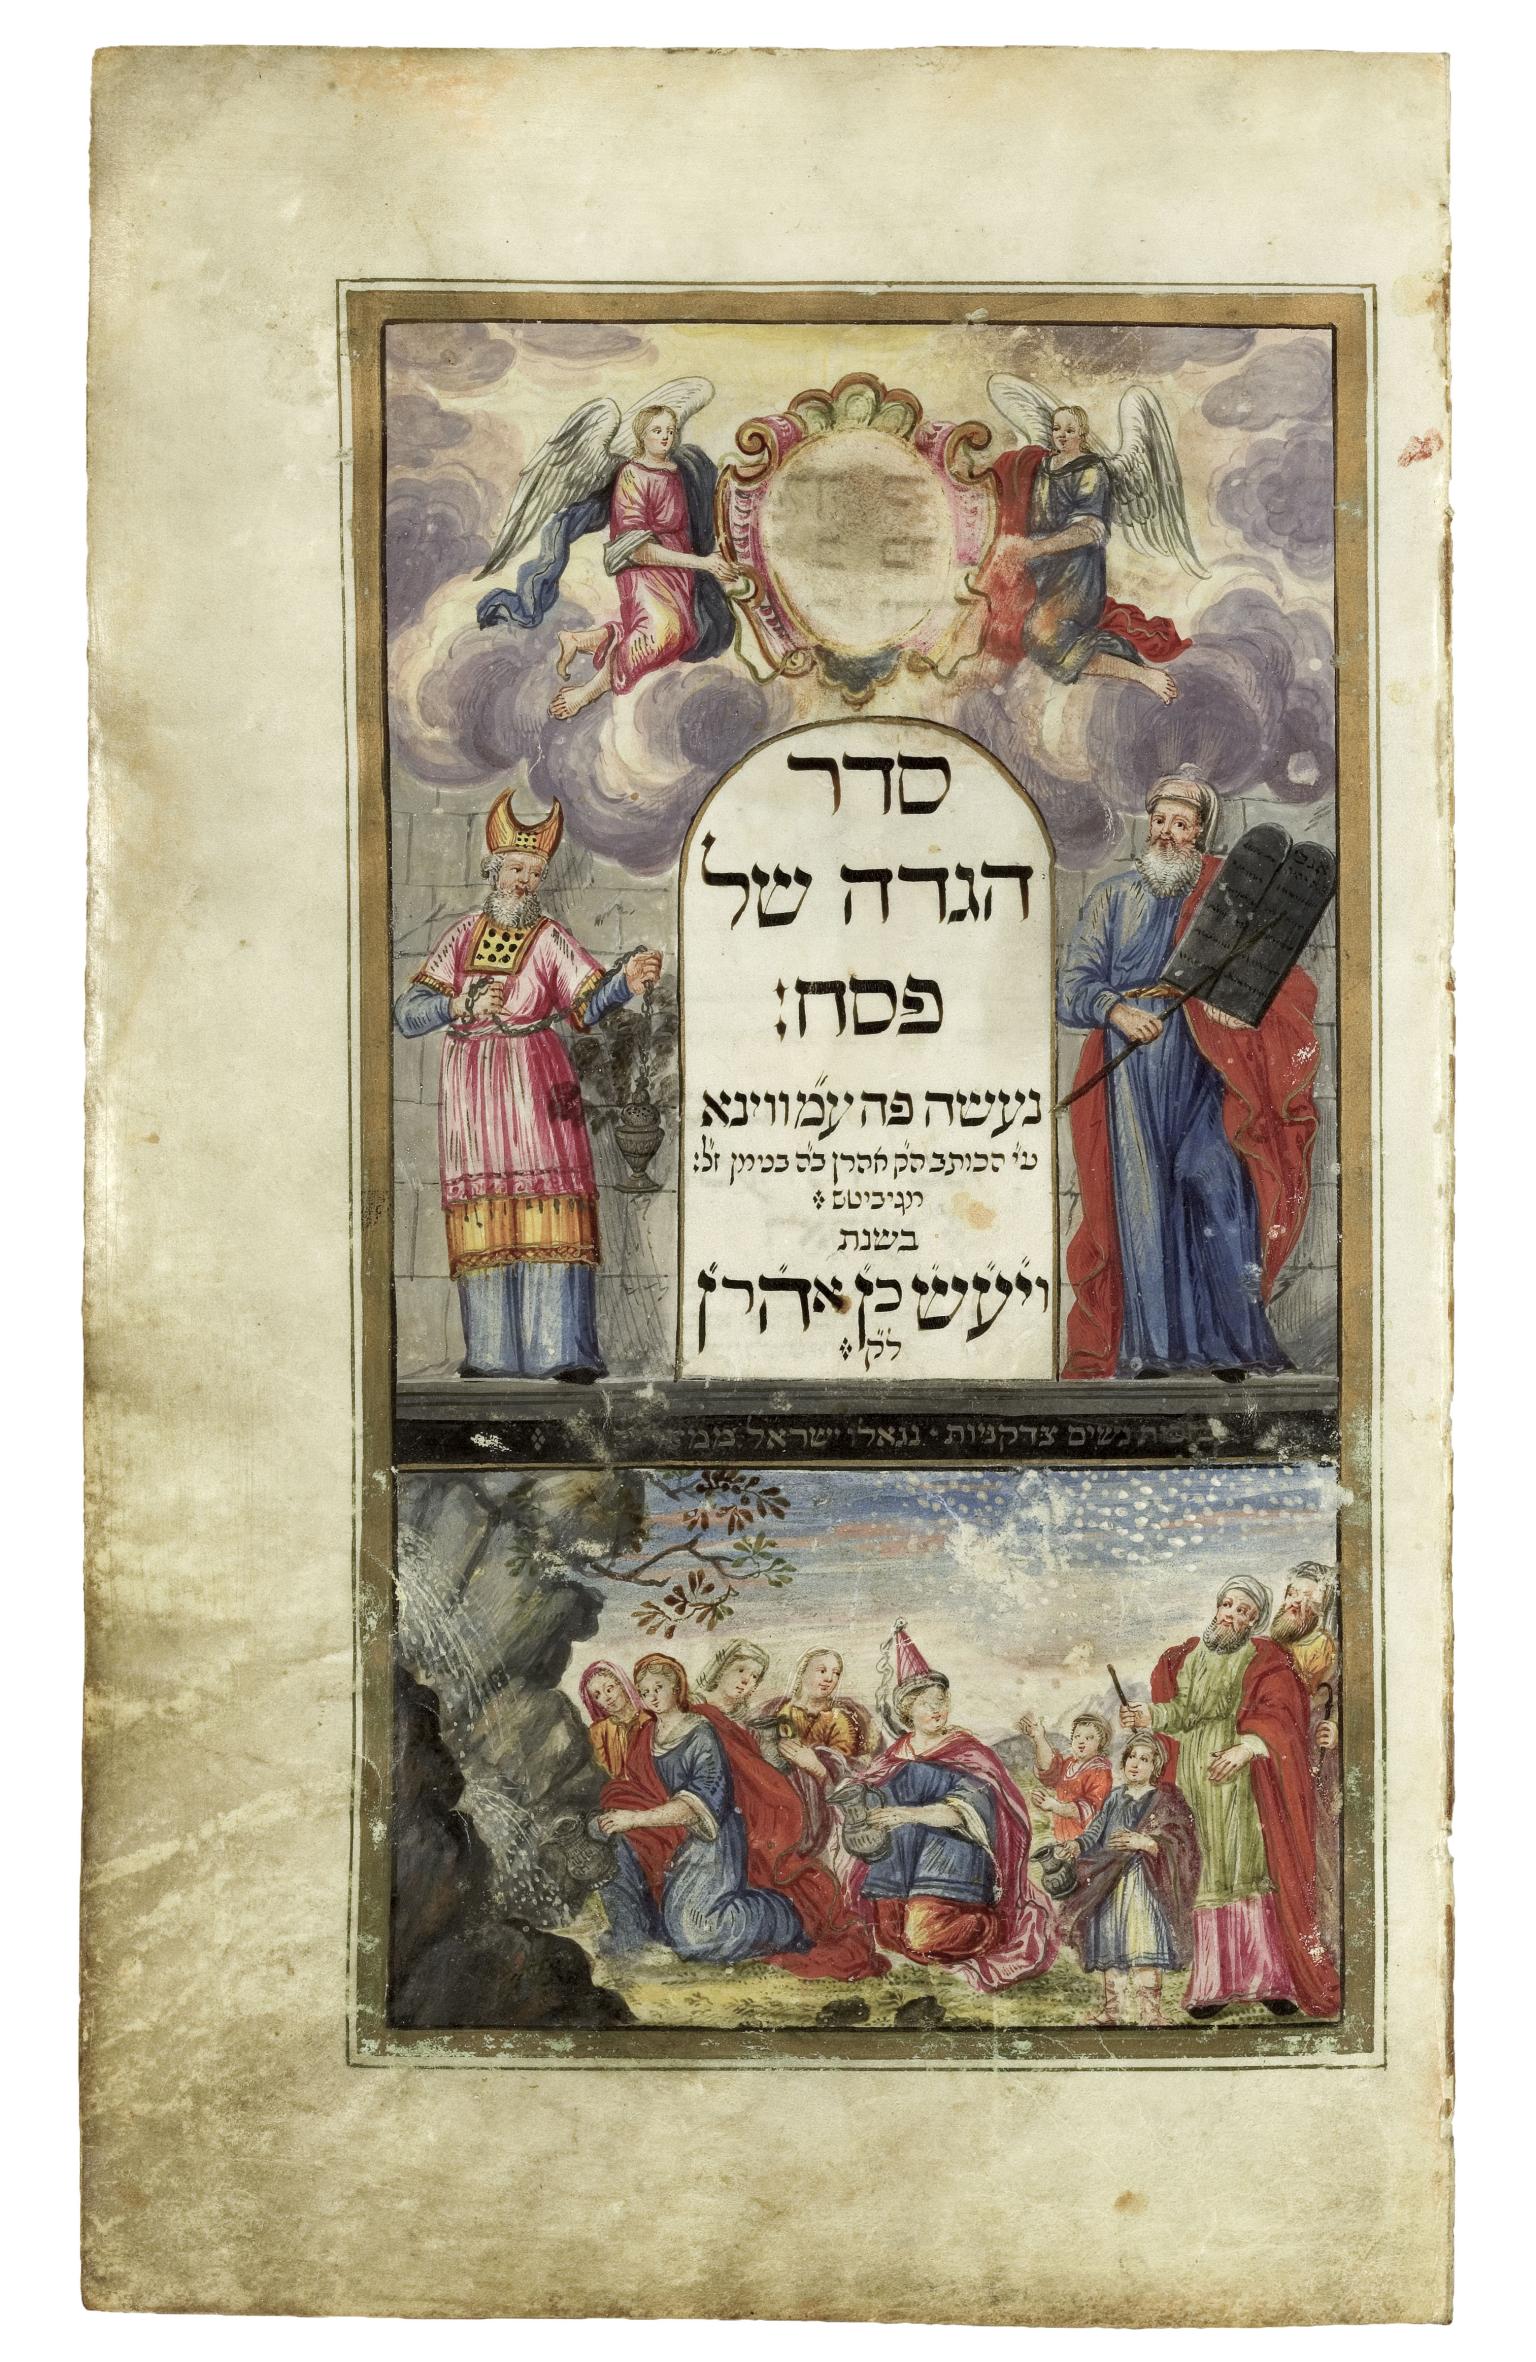 Manuscript page with Hebrew text in center and illustrations surrounding, including figures on left and right of text, two cherubs above text, and group of people below.